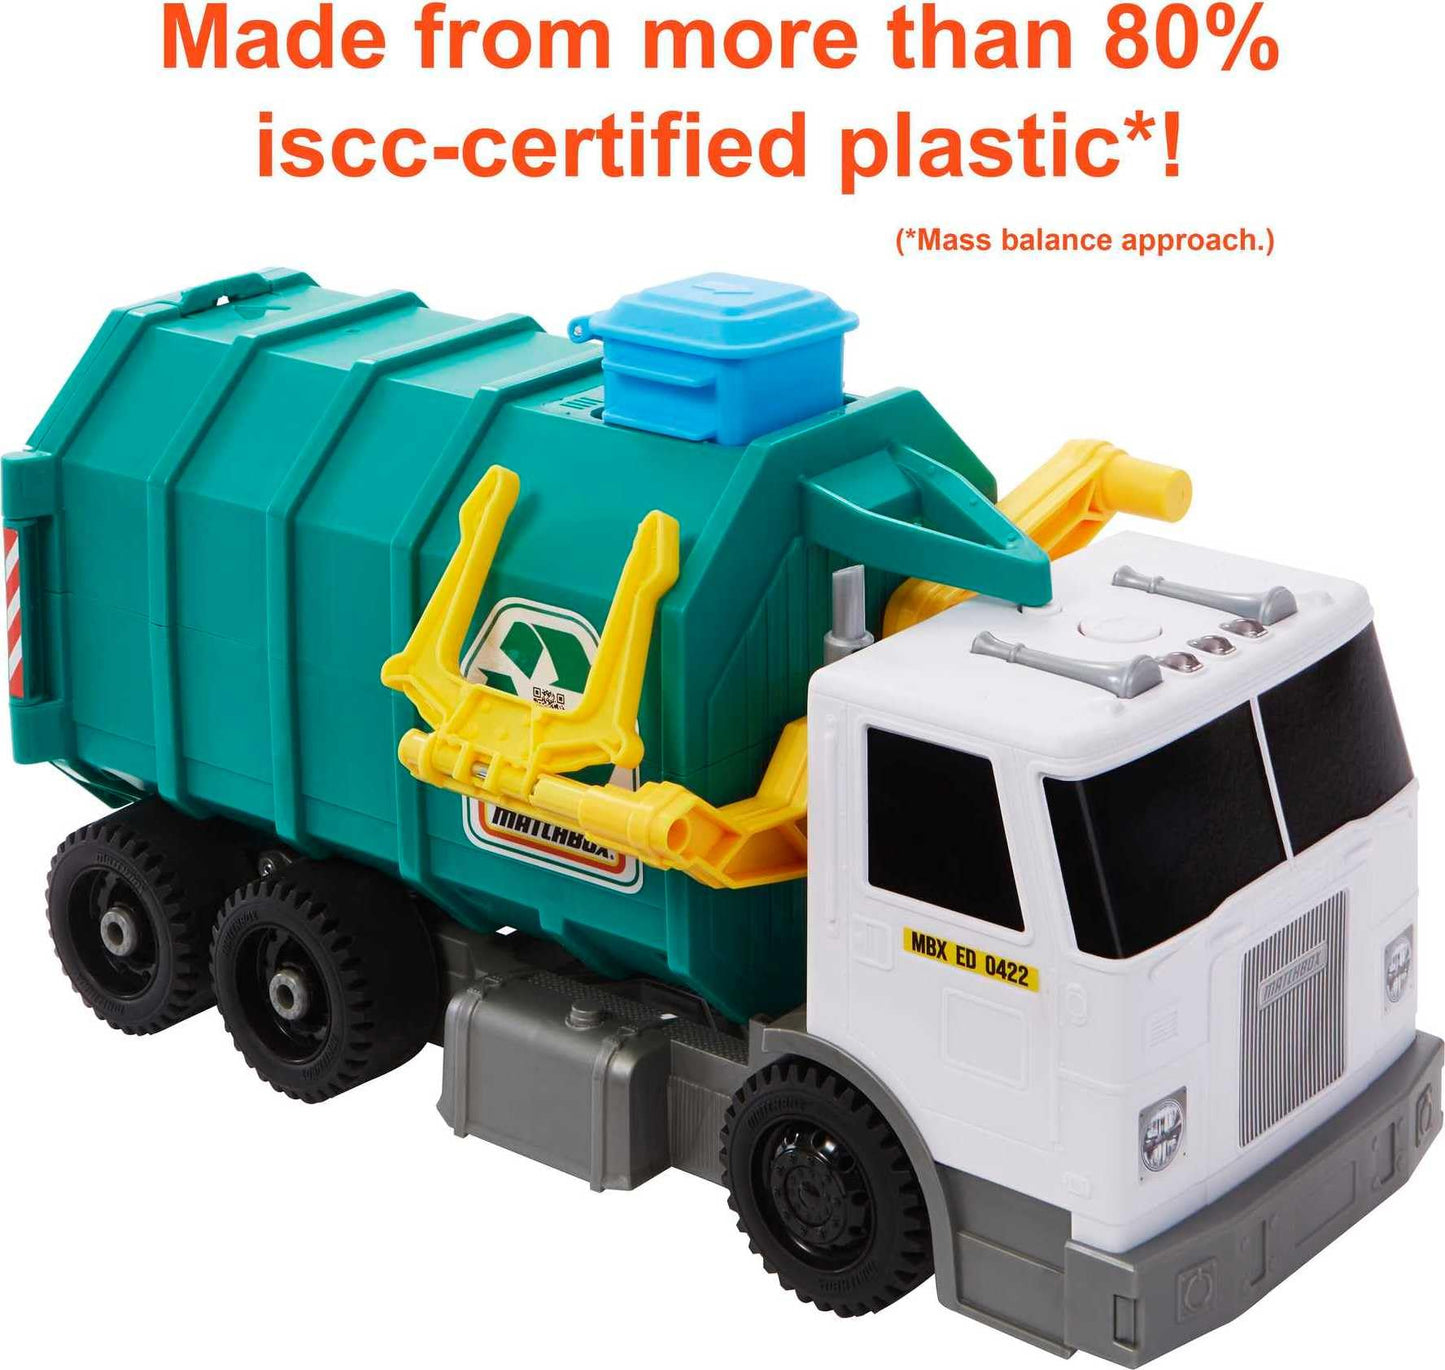 Matchbox Cars, 15-Inch Toy Recycling Garbage Truck with Lights and Sounds, Green Toy for Kids (Amazon Exclusive)